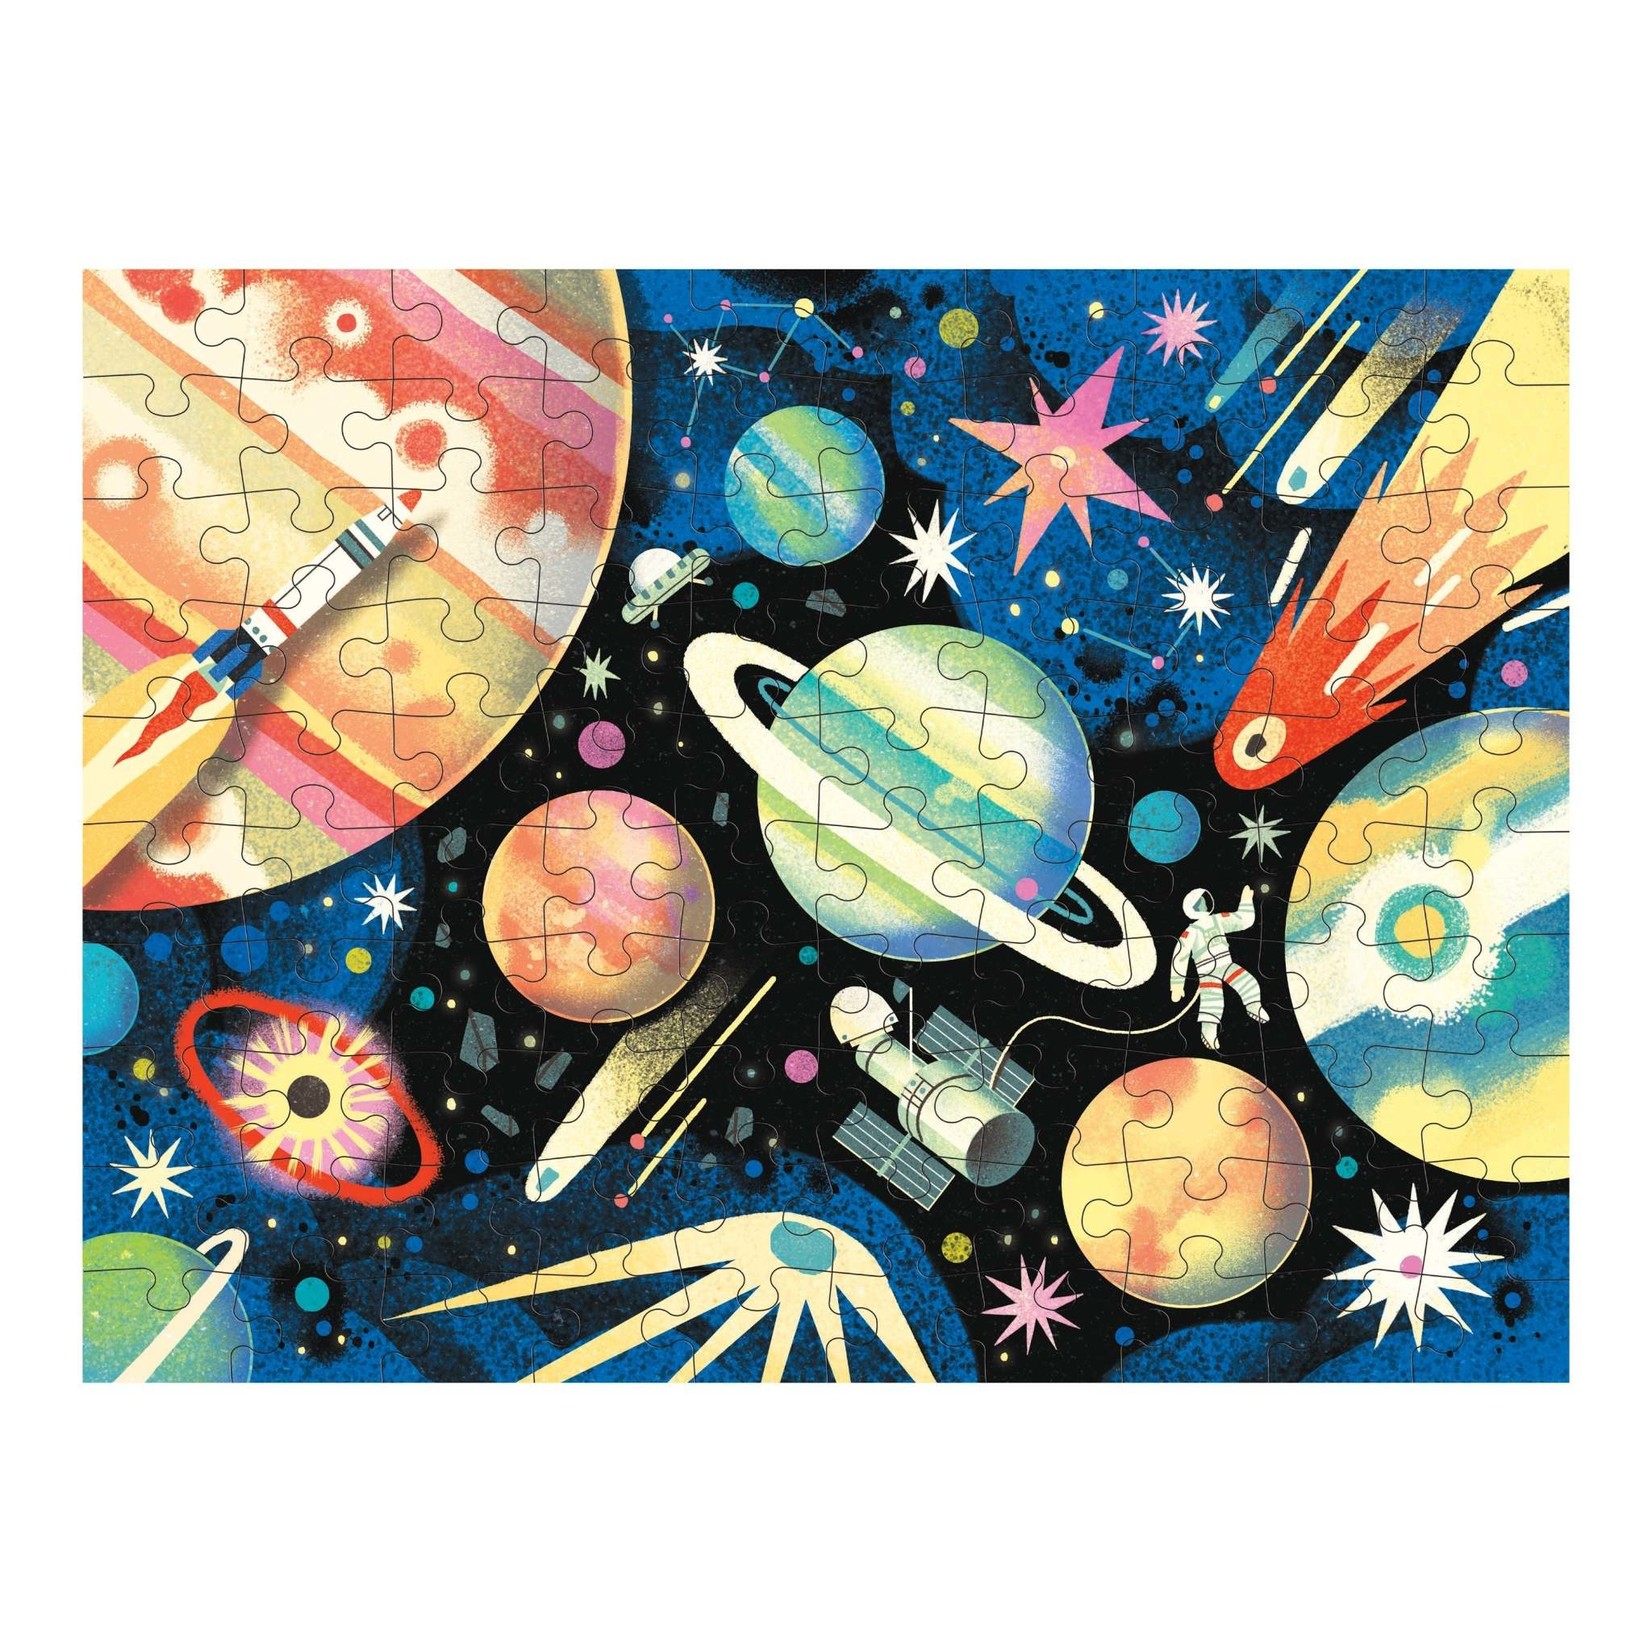 Mudpuppy Double-Sided Puzzle - Space Mission 100 Pieces